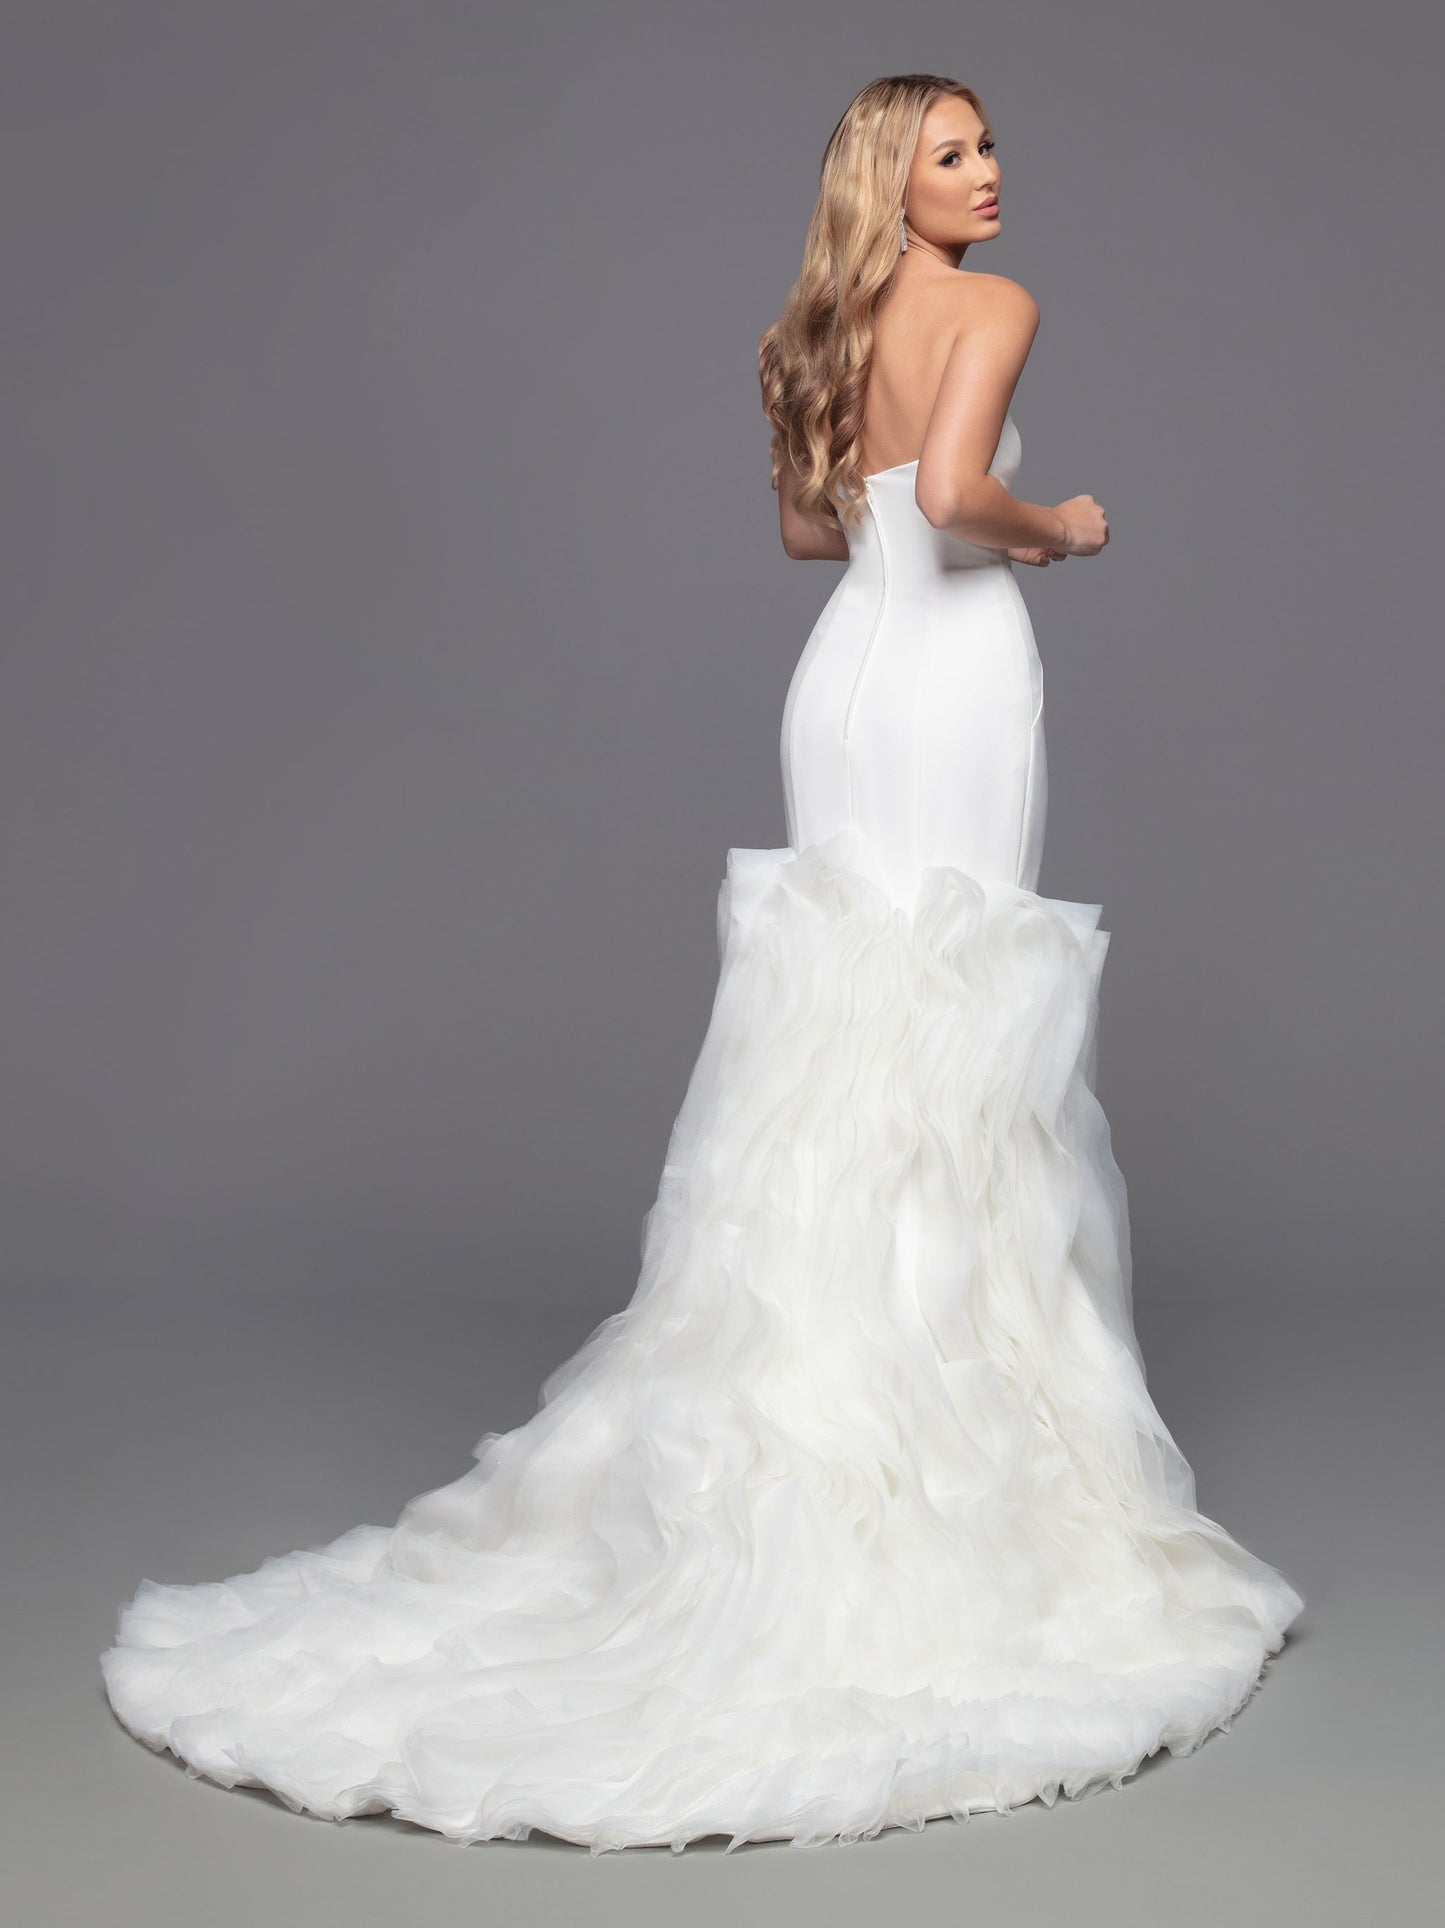 Look truly striking with Davinci Bridal 50802, a strapless crepe mermaid dress featuring a dramatic full skirt of ruffled organza. Enjoy timeless elegance with a contemporary twist in this figure-enhancing gown.  Sizes: 2-20  Colors: Ivory